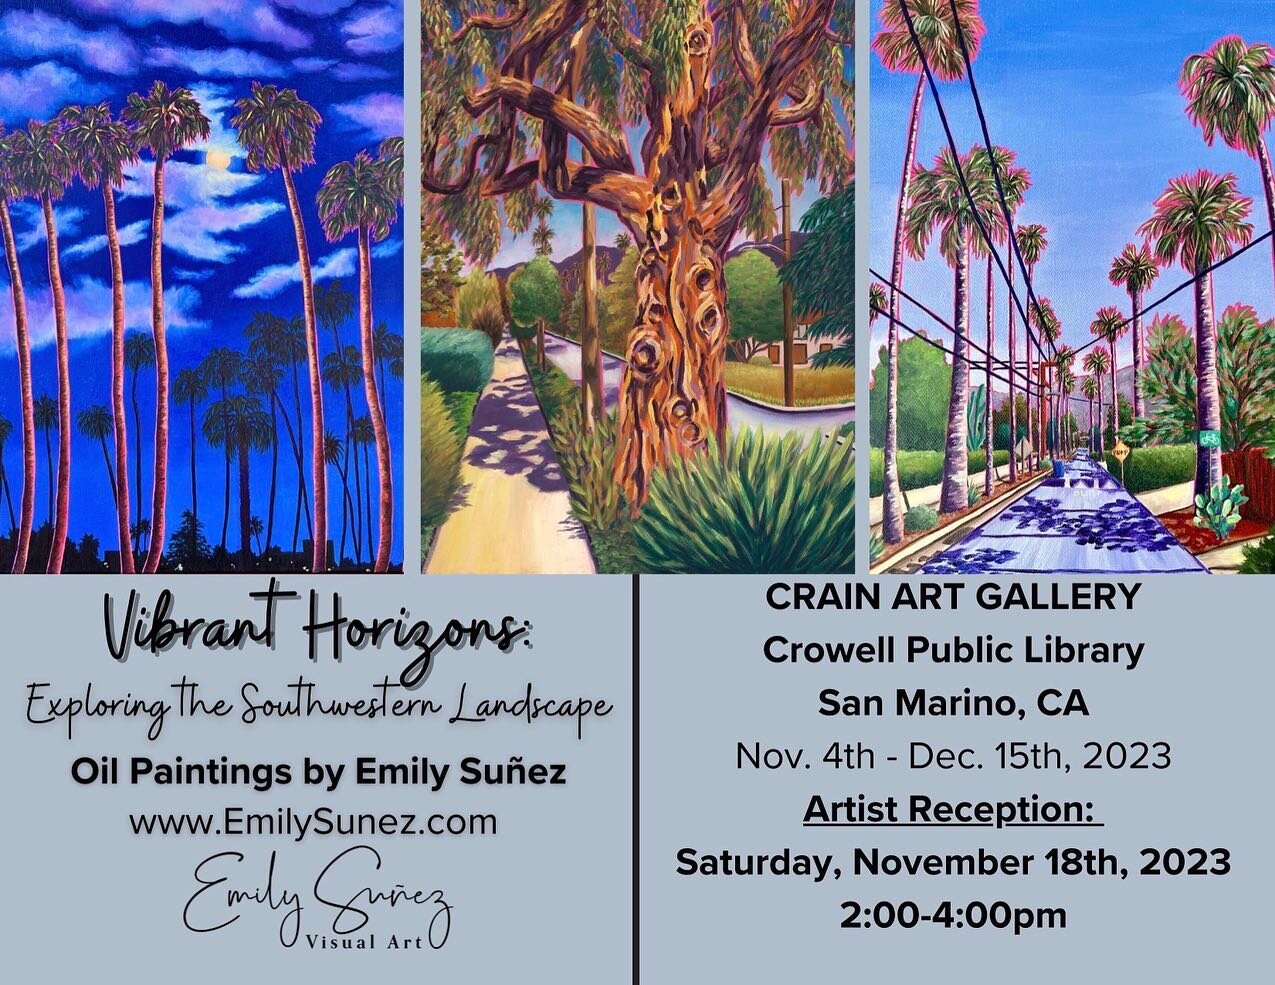 This Saturday, November 18th, 2-4pm is the artist reception for my solo show Vibrant Horizons: Exploring the Southwestern Landscape at Crowell Public Library's CRAIN GALLERY in San Marino. Drop by to check it out and say hello! We'll be hanging out i